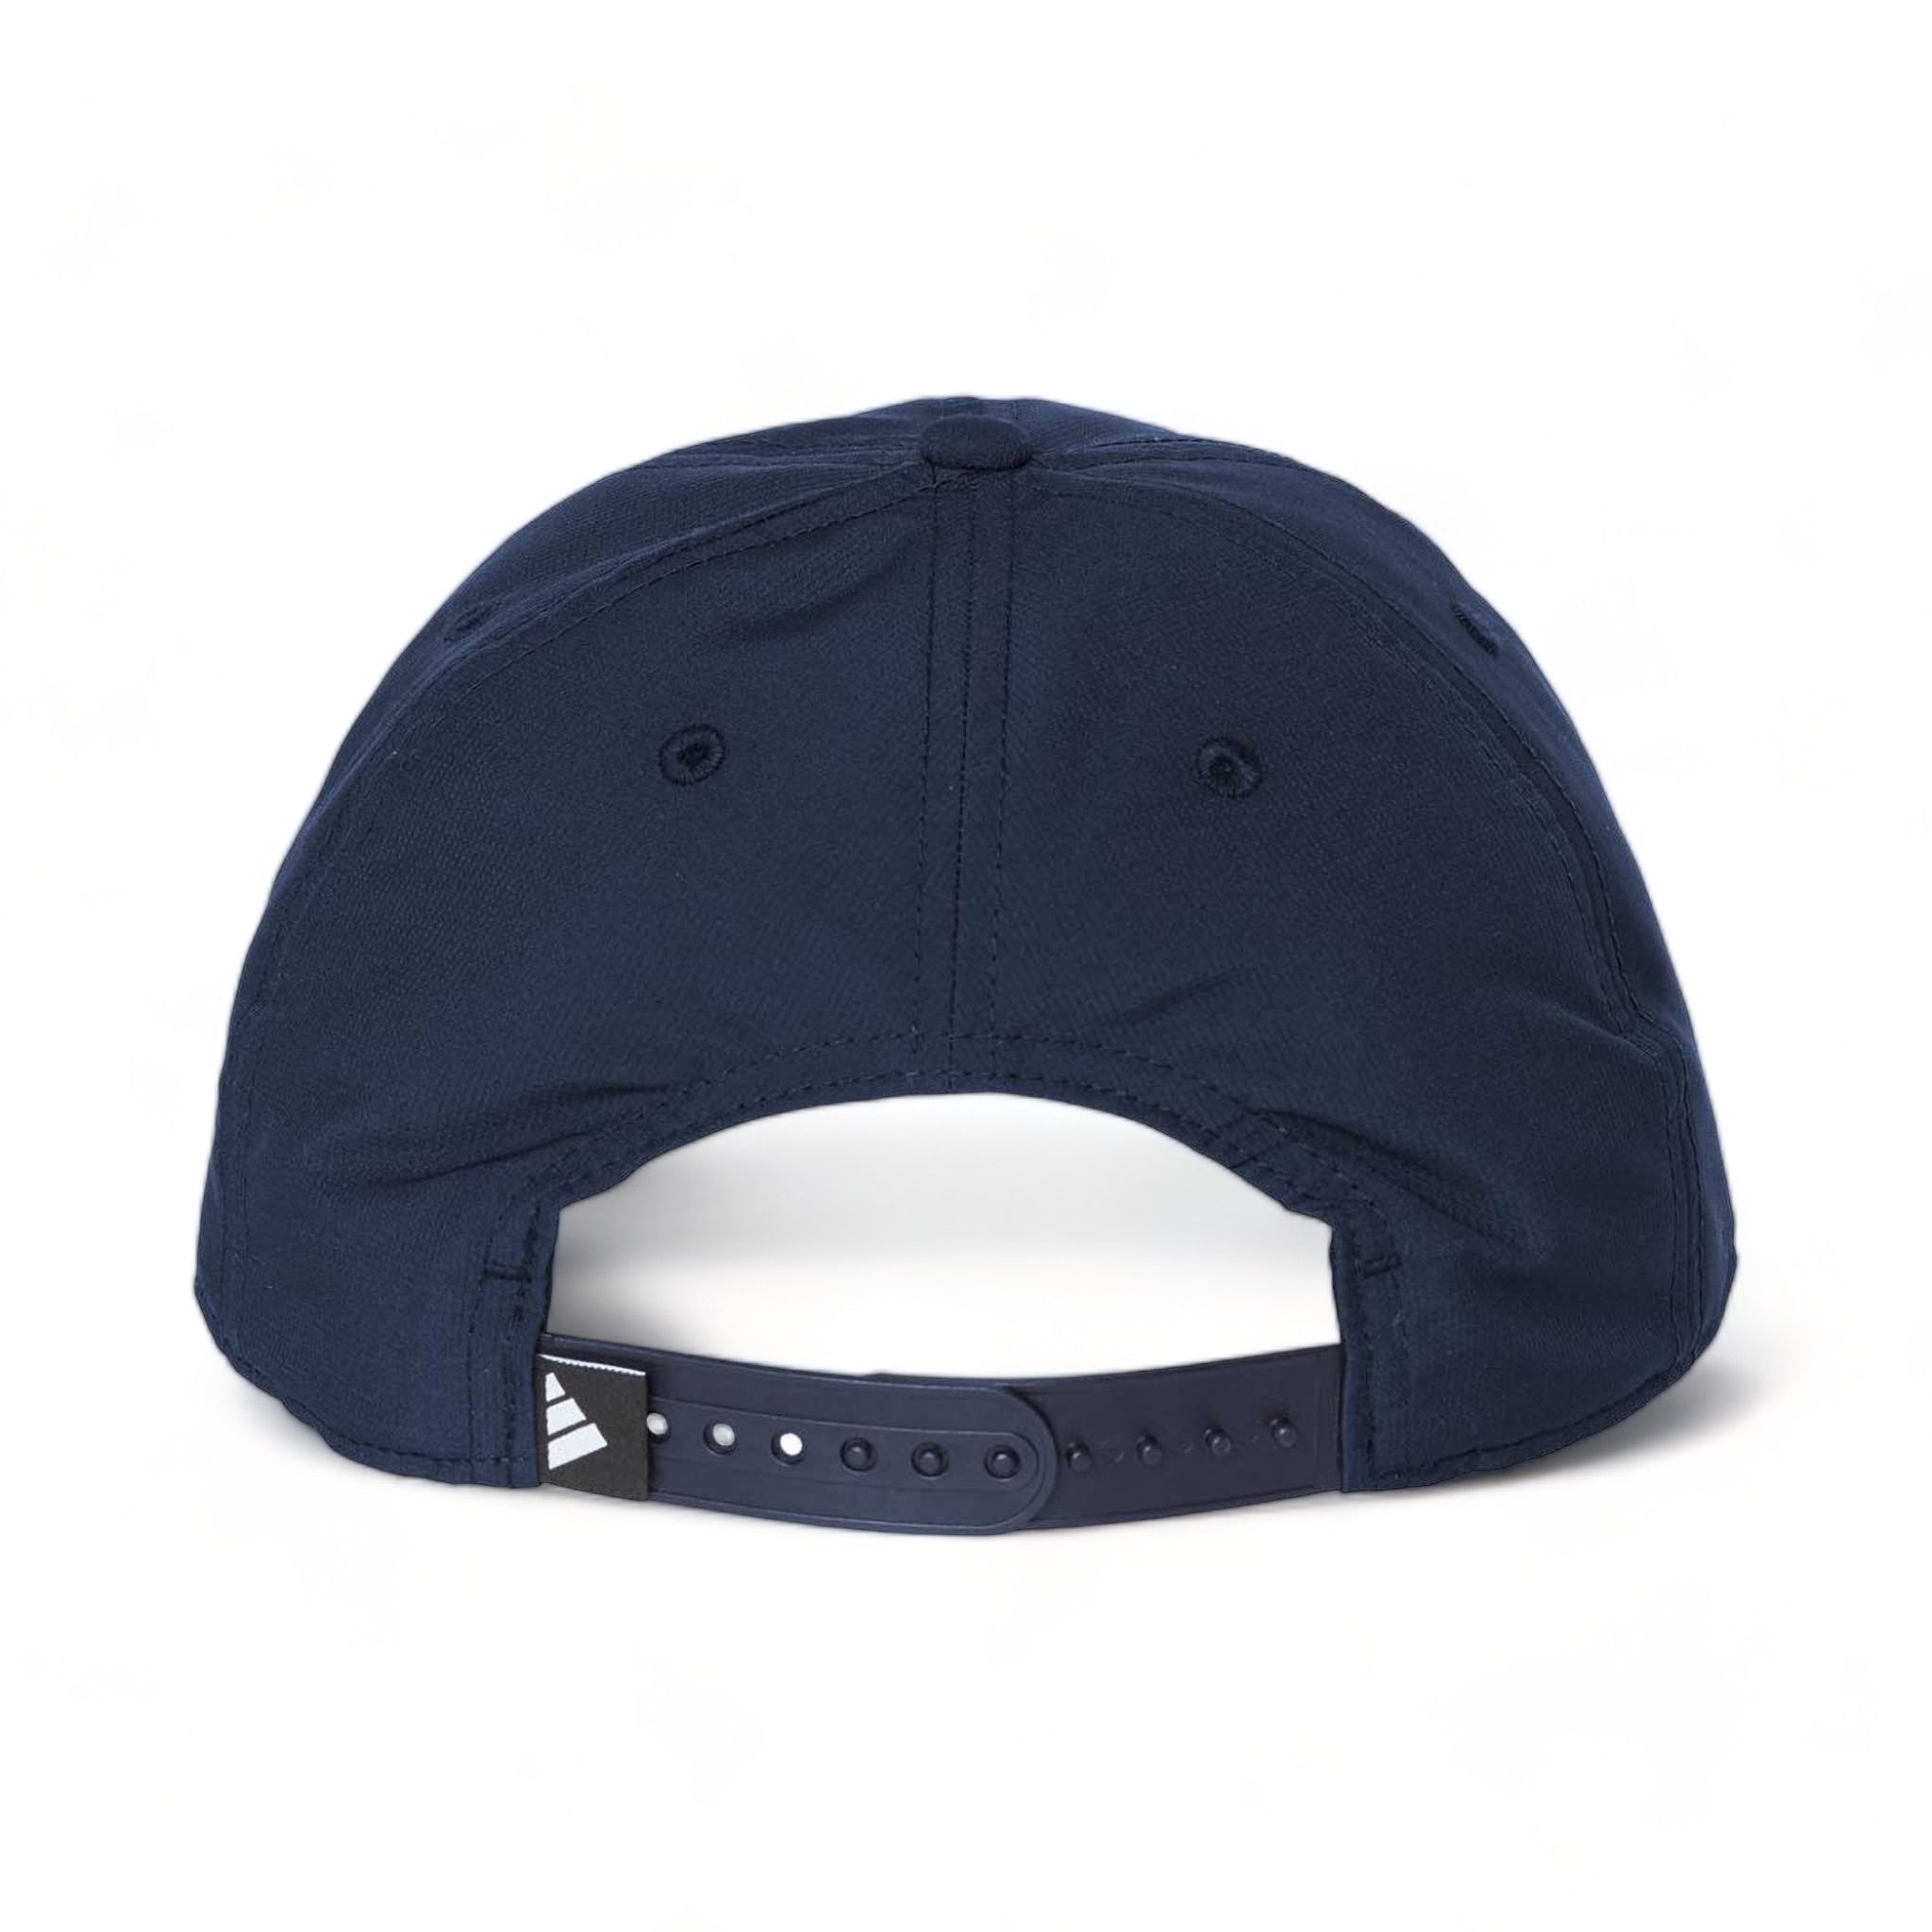 Back view of Adidas A600S custom hat in collegiate navy